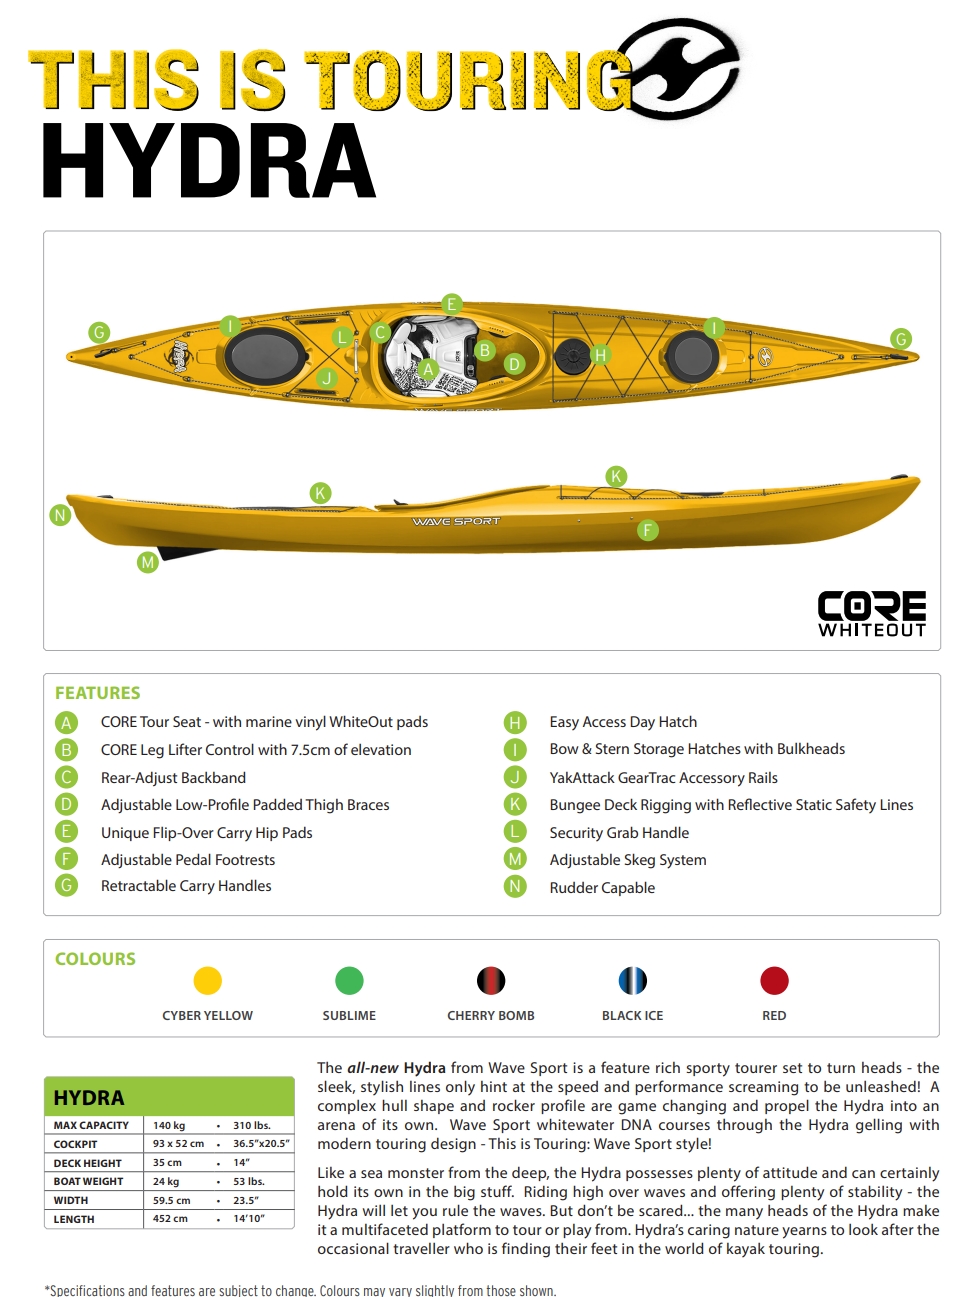 Hydra Features